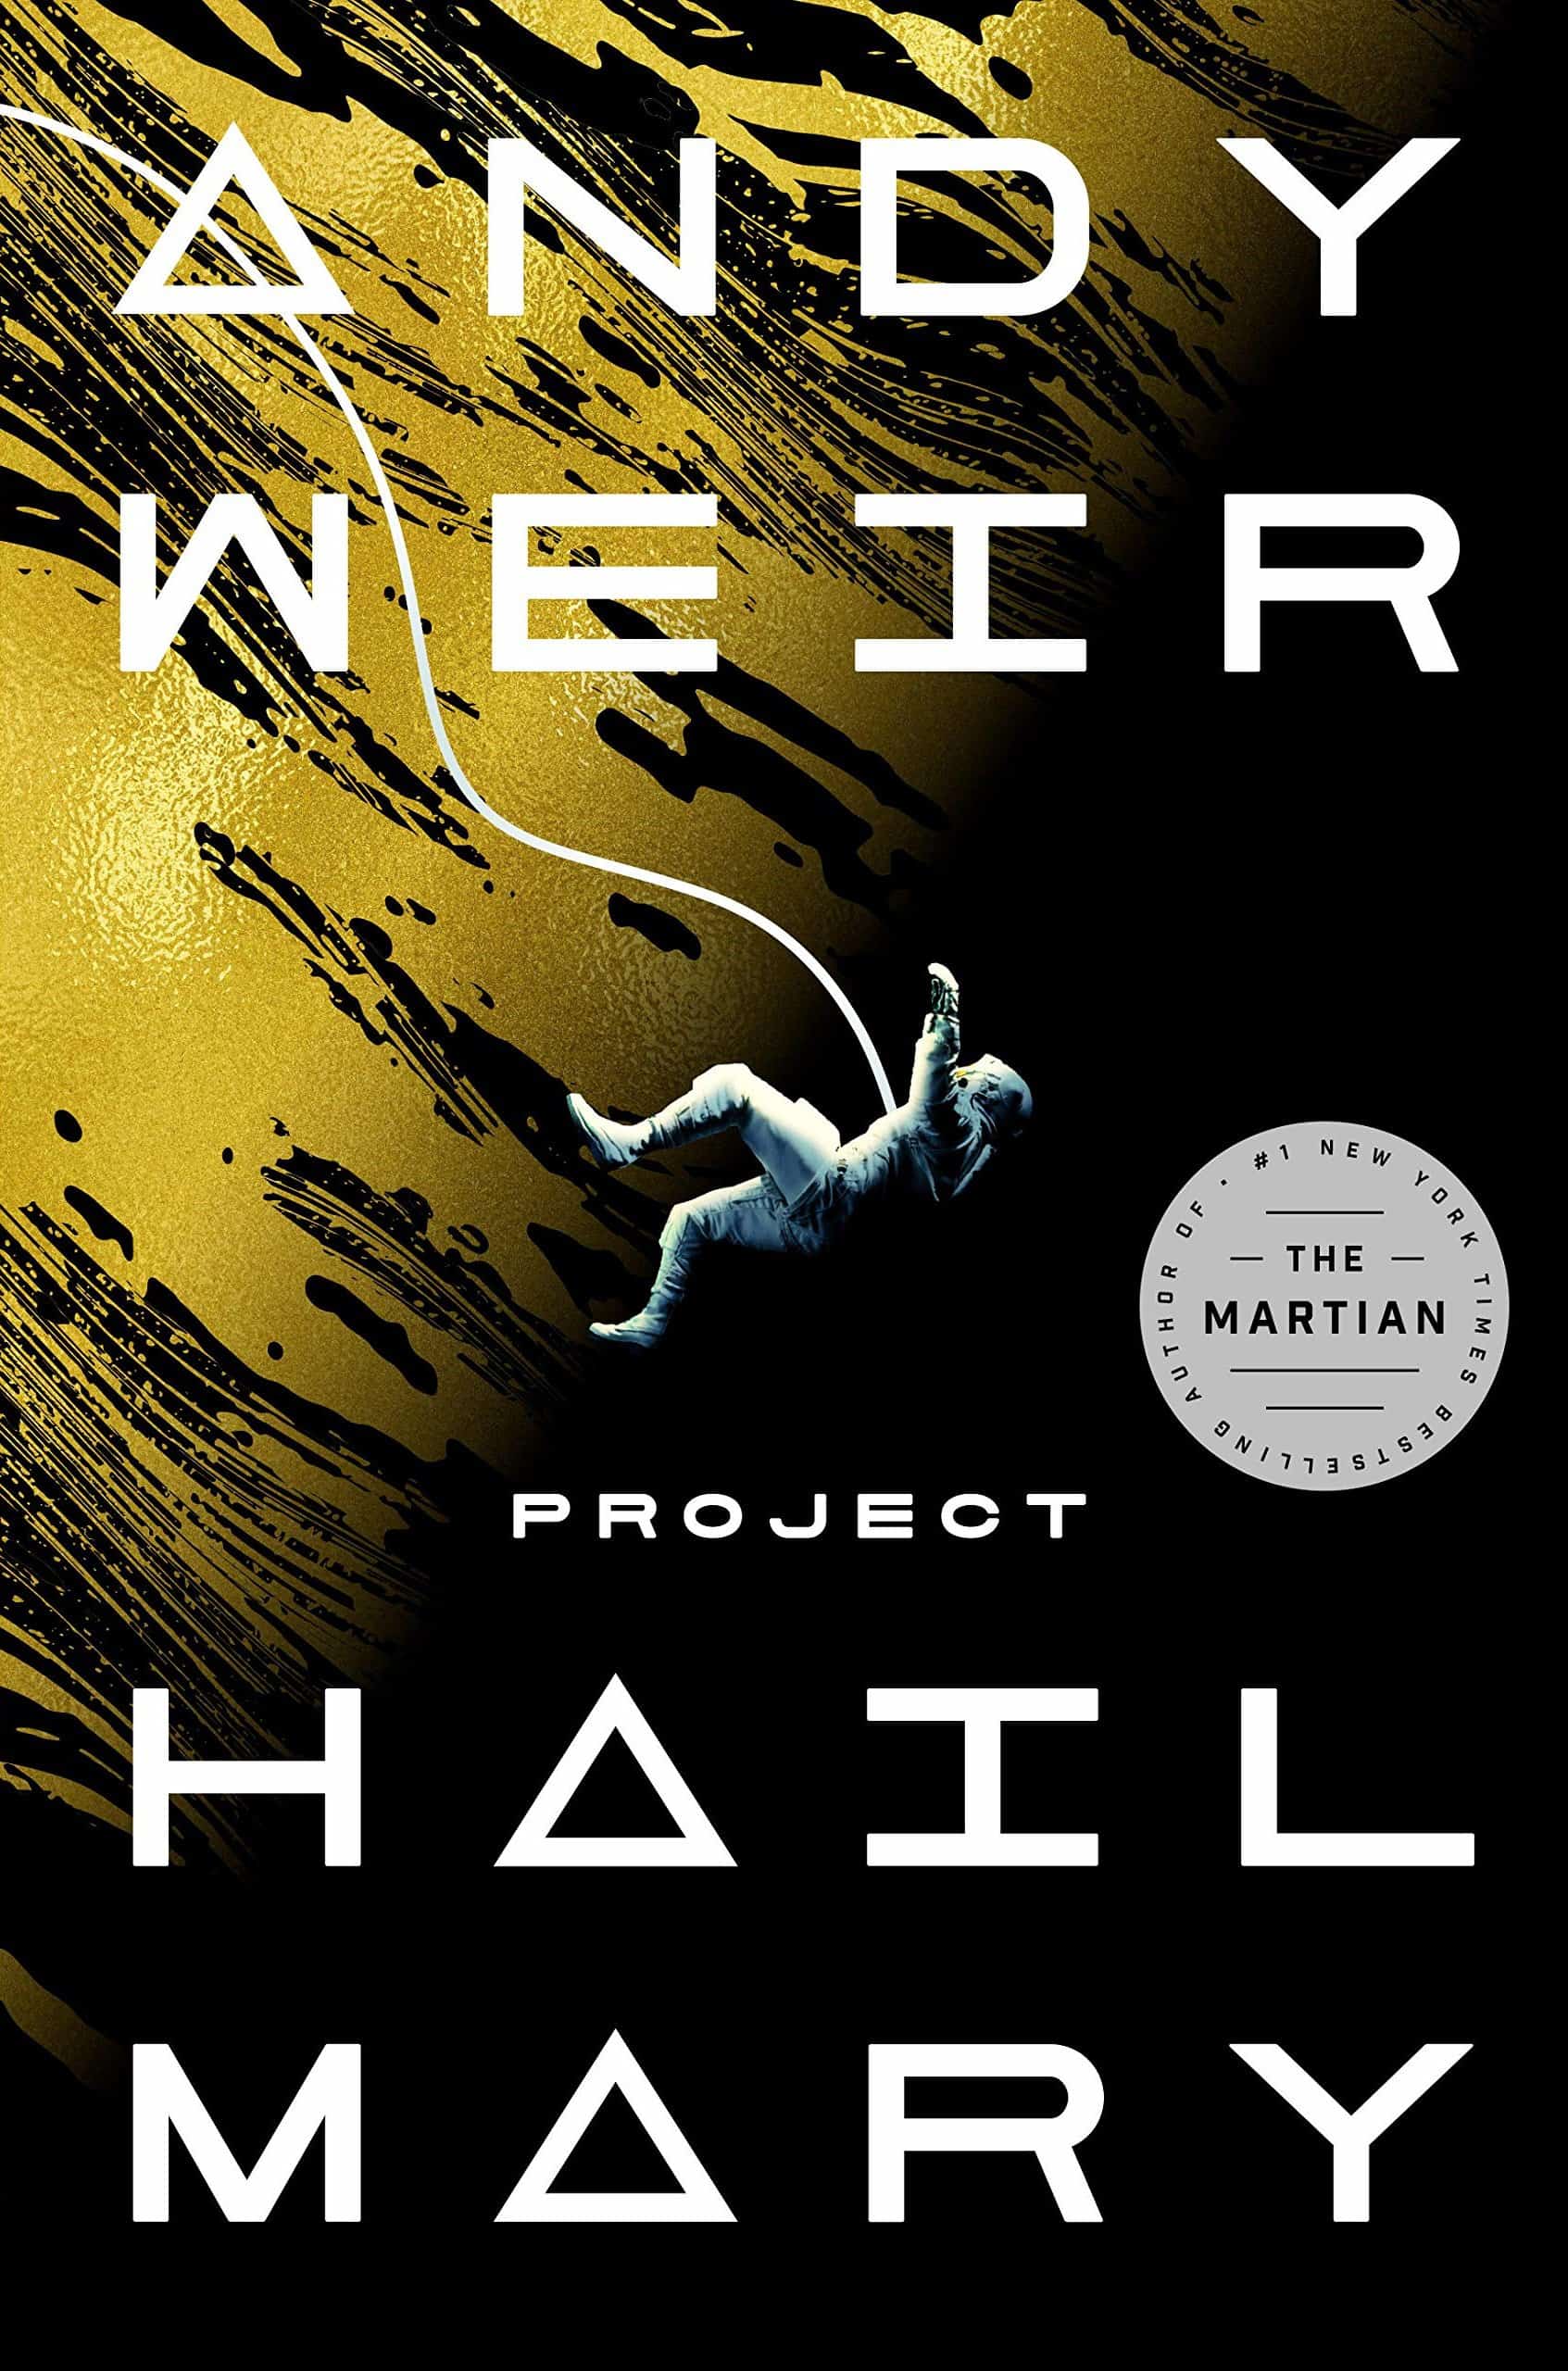 <ul> <li><strong>Runtime:</strong> 16 hours, 10 minutes</li>    <li><strong>Author:</strong> Andy Weir</li>    <li><strong>Narrator:</strong> Ray Porter</li> </ul>    <p>Andy Weir's novel <em>The Martian</em> gets a lot of love from readers. However, it's his follow-up <em>Project Hail Mary</em> that the <a rel="noopener" href="https://www.reddit.com/r/audiobooks/comments/h0t8h1/what_is_everyones_top_5_or_top_10_audiobooks/">communities</a> feel is one of the best audiobooks. <em>Project Hail Mary</em> is a thrilling science fiction audiobook that follows an astronaut's desperate mission to save humanity. Fans say narrator Ray Porter knocks the gig out of the park. (That's the same Ray Porter who played Darkseid in the DCEU's Justice League.) Listeners love the gripping plot, the meticulous scientific detail, and the sense of wonder and suspense radiating from the modern sci-fi story.</p>